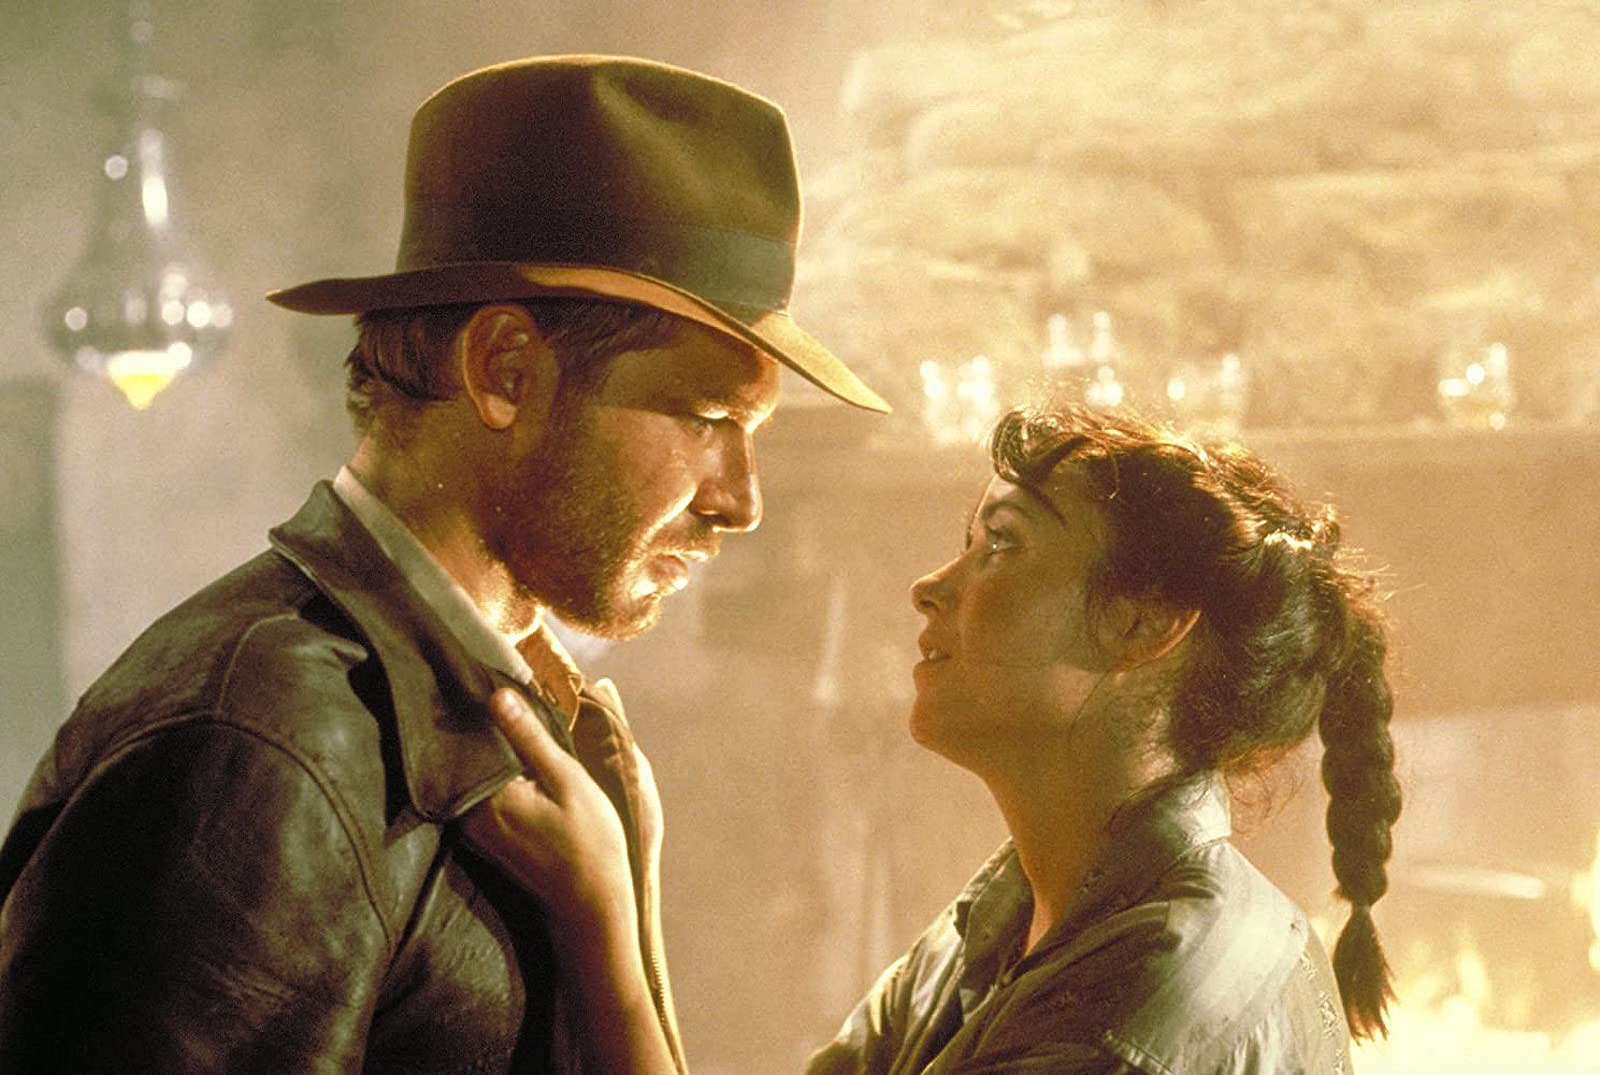 Raiders of the Lost Ark Ending Explained